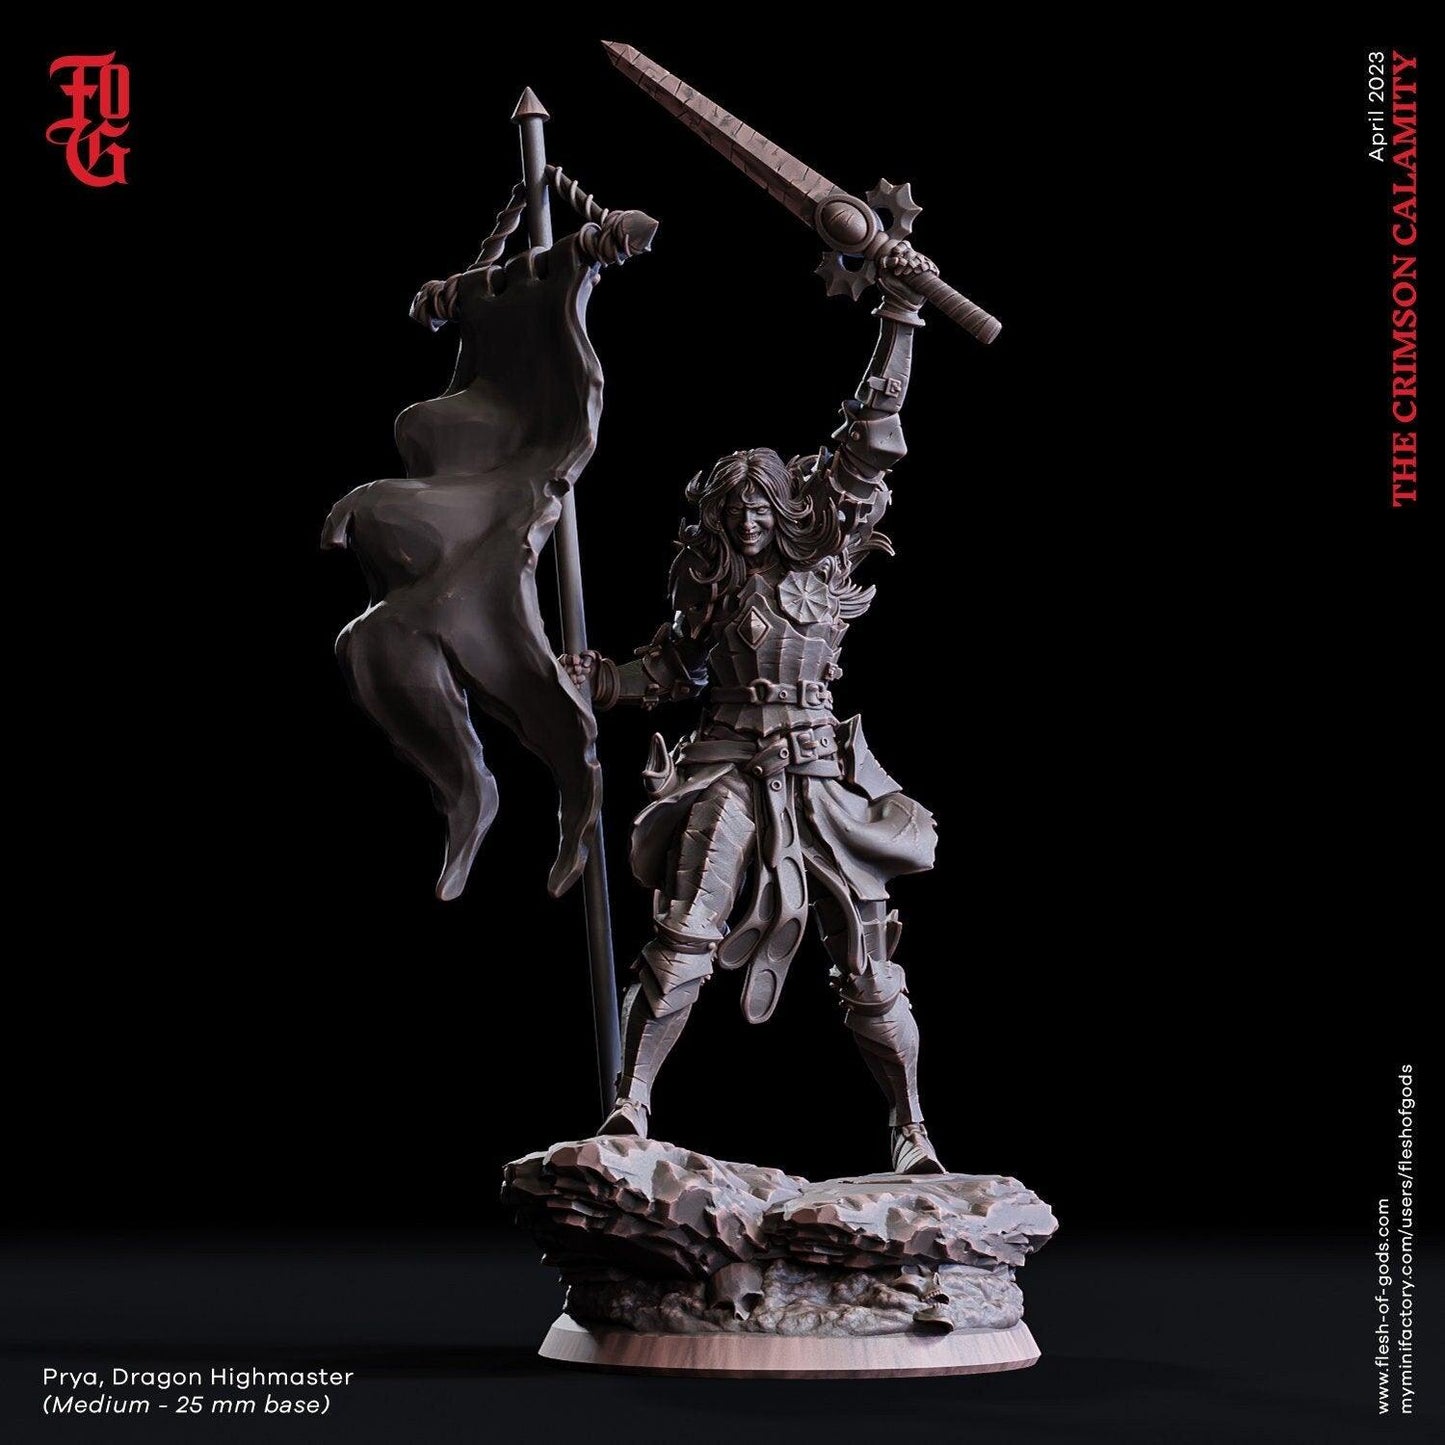 Male Warrior Miniature Dragon Highmaster | 25mm Base 75mm Scale | DnD Miniature Dungeons and Dragons DnD 5e fighter paladin figure - Plague Miniatures shop for DnD Miniatures